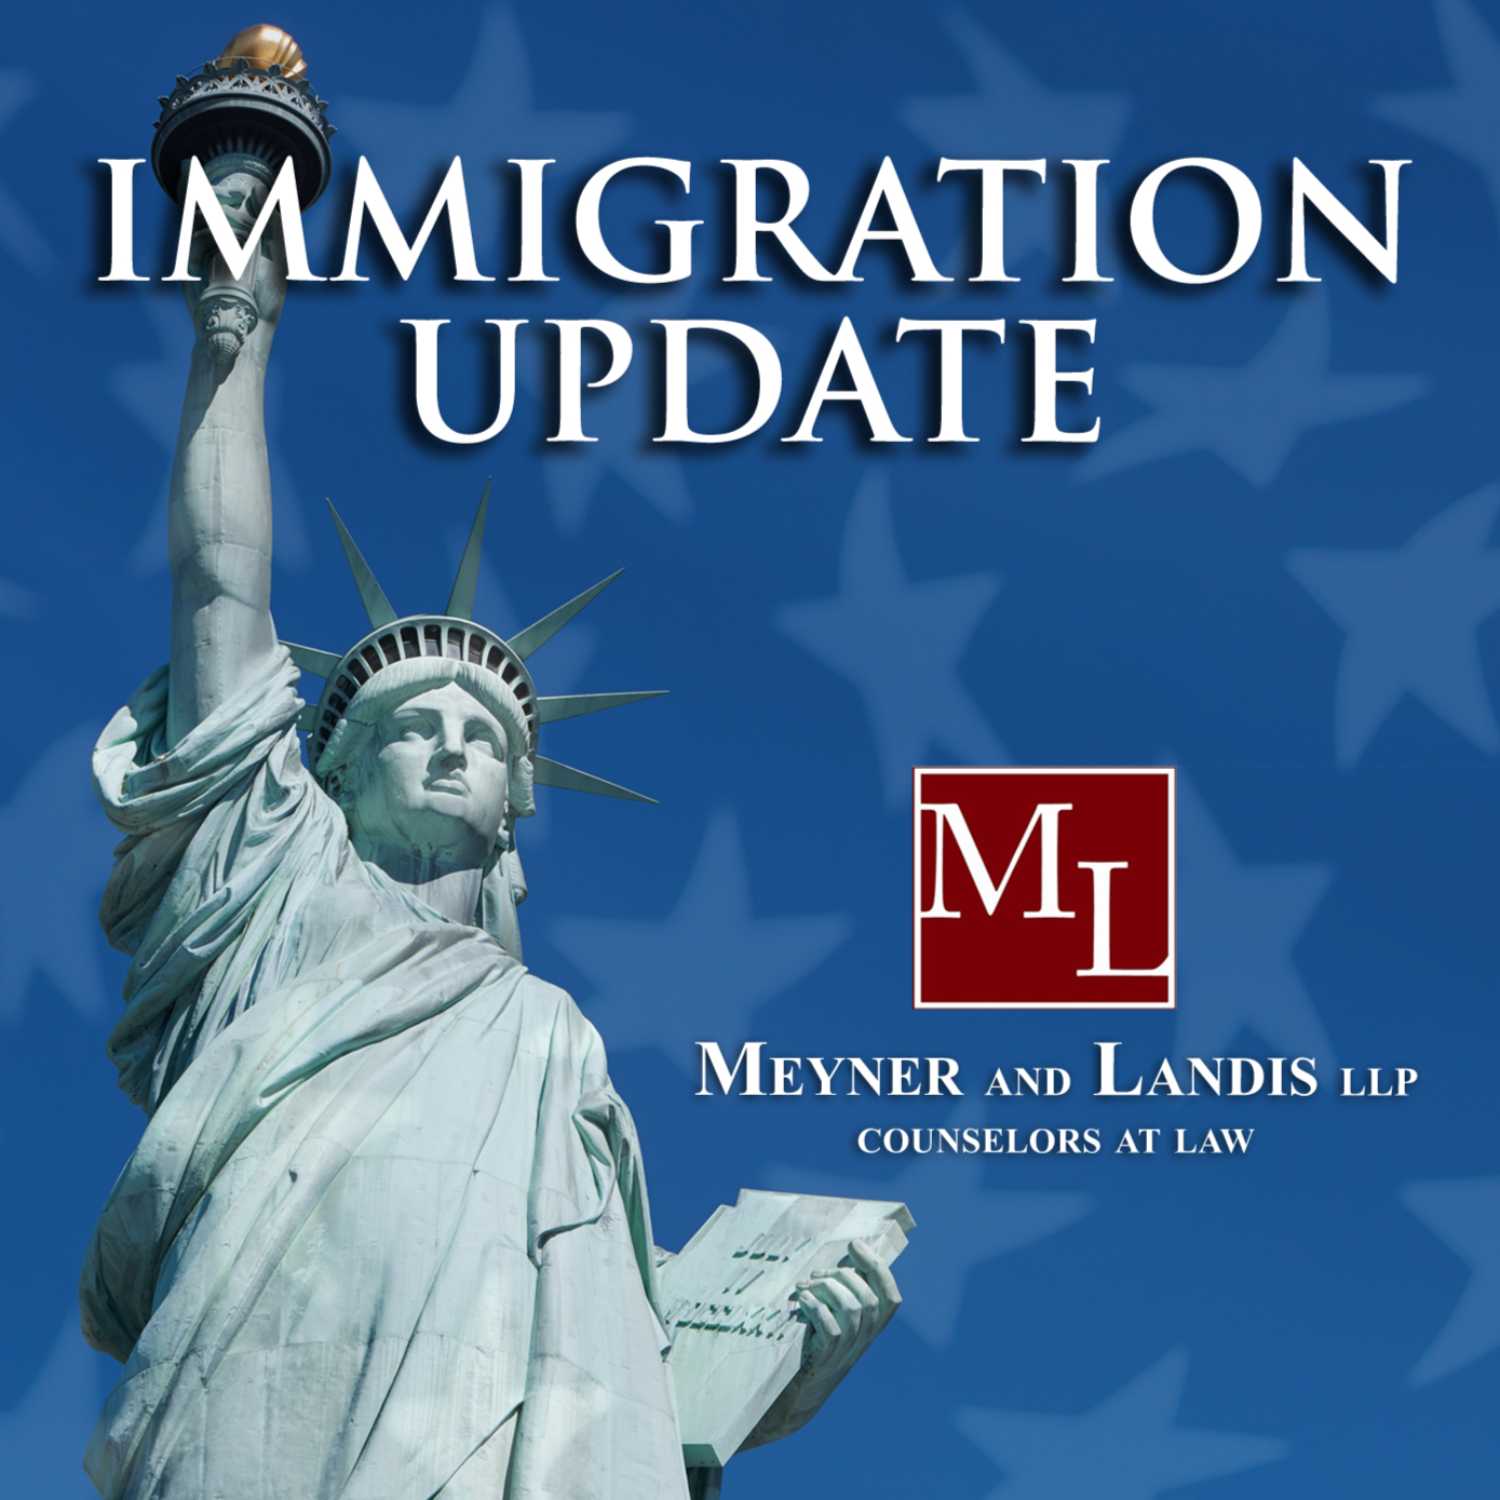 A Review of the Potentially Damaging DHS Final Rule Creating Wage-Based Selection System for H-1B Cap Subject Petitions